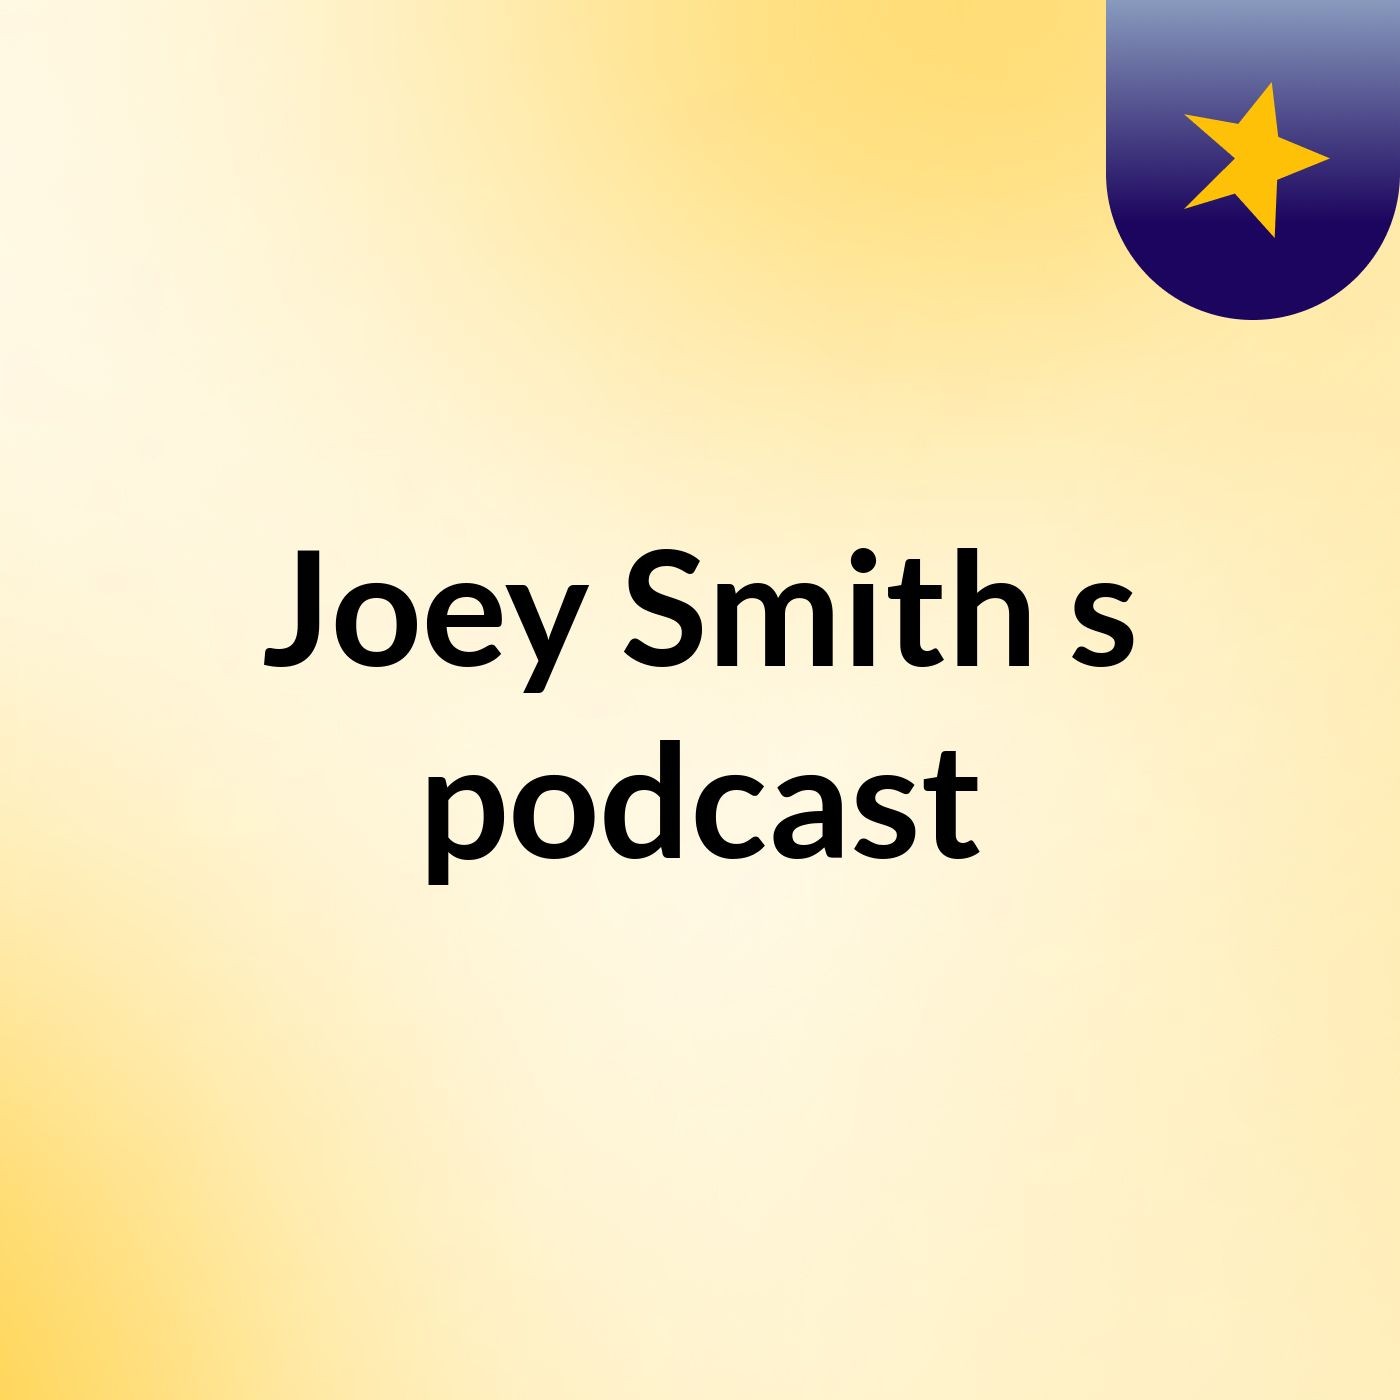 Episode 2 - Joey Smith's podcast